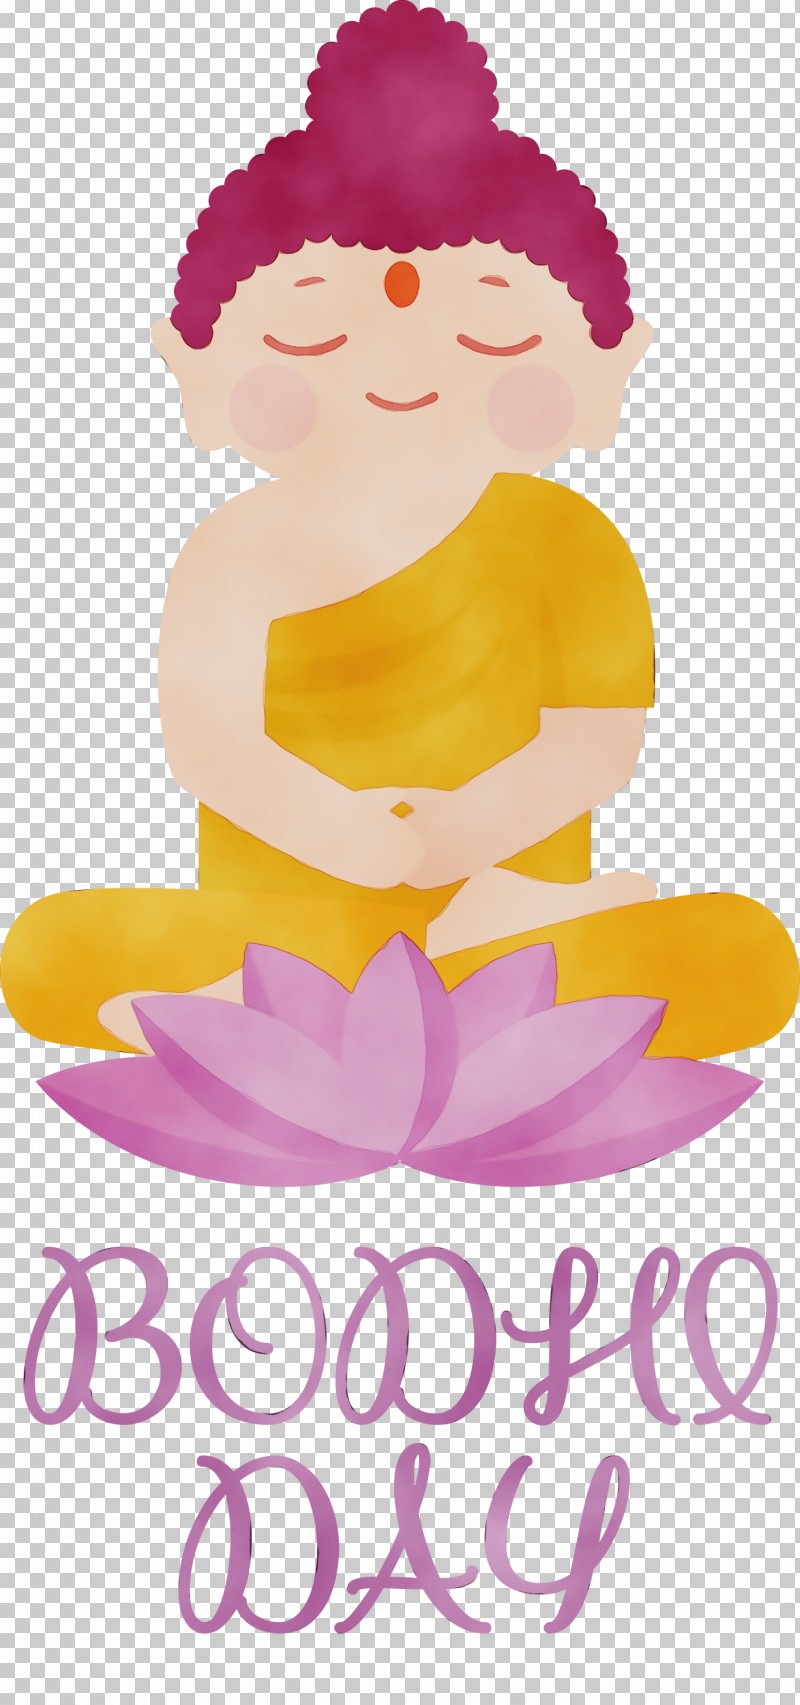 Cartoon Character Petal Flower Happiness PNG, Clipart, Bodhi Day, Cartoon, Character, Flower, Happiness Free PNG Download